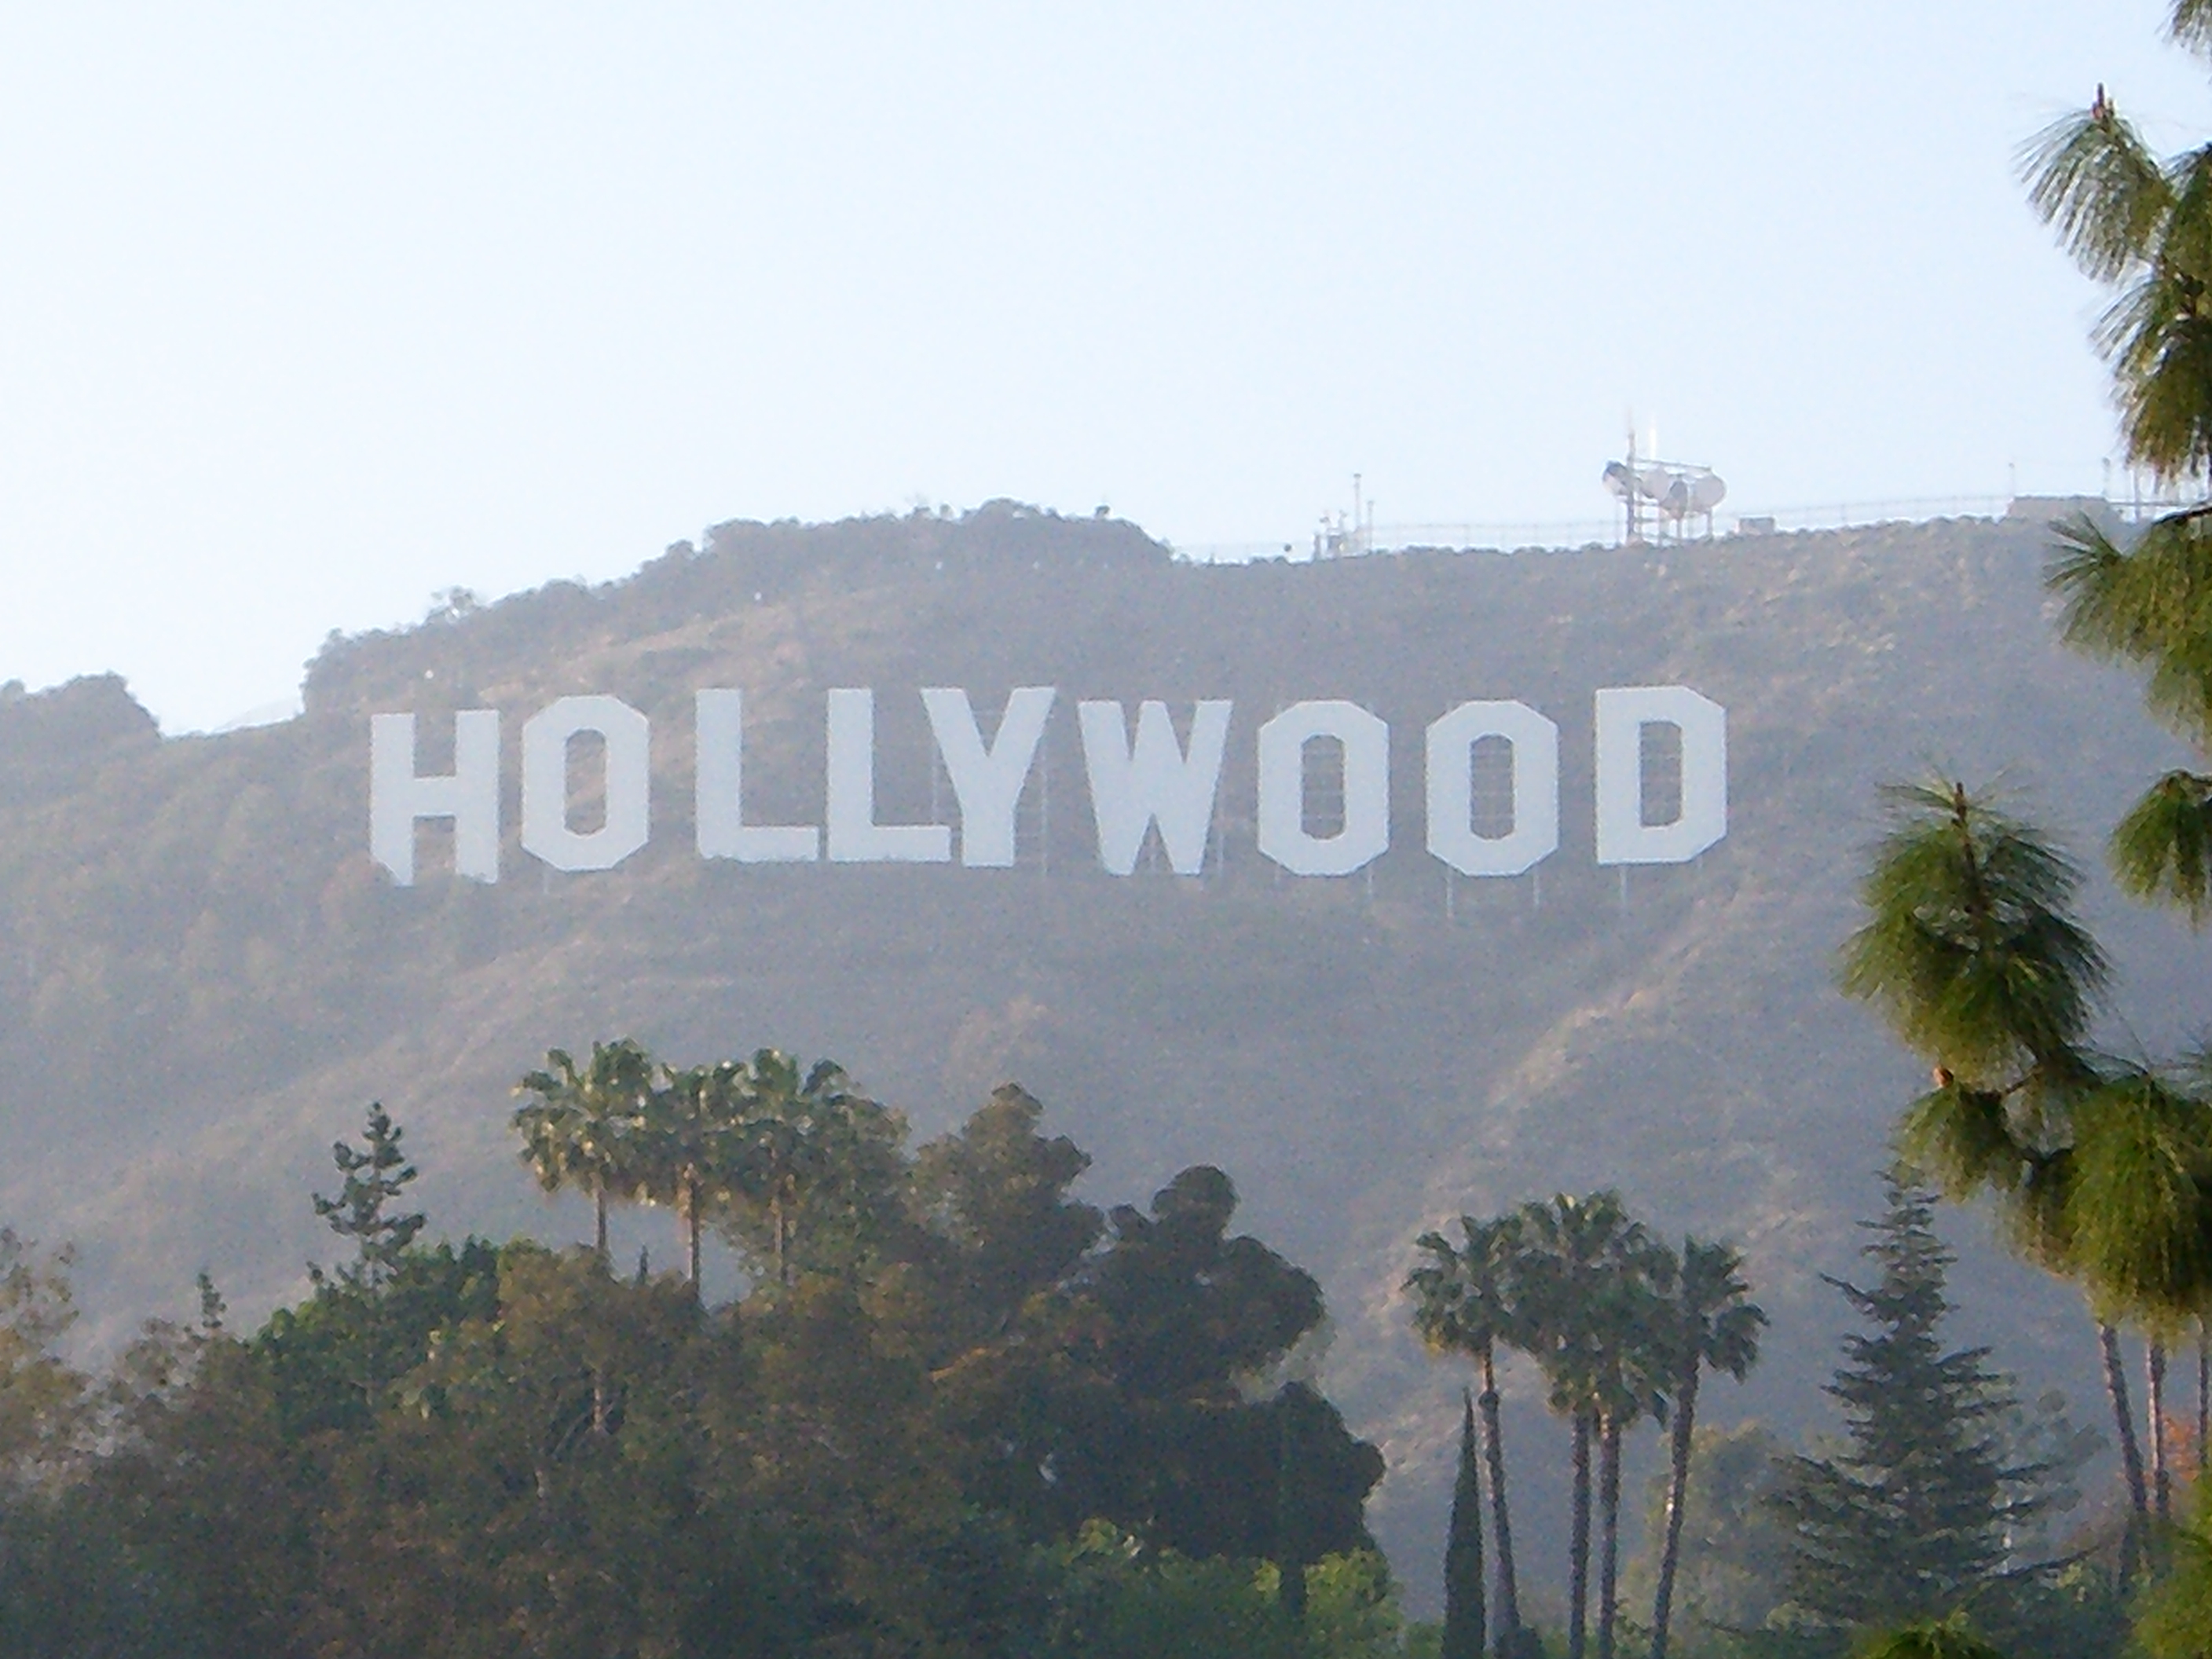 To The Hollywood Sign Wallpaper Picswallpaper